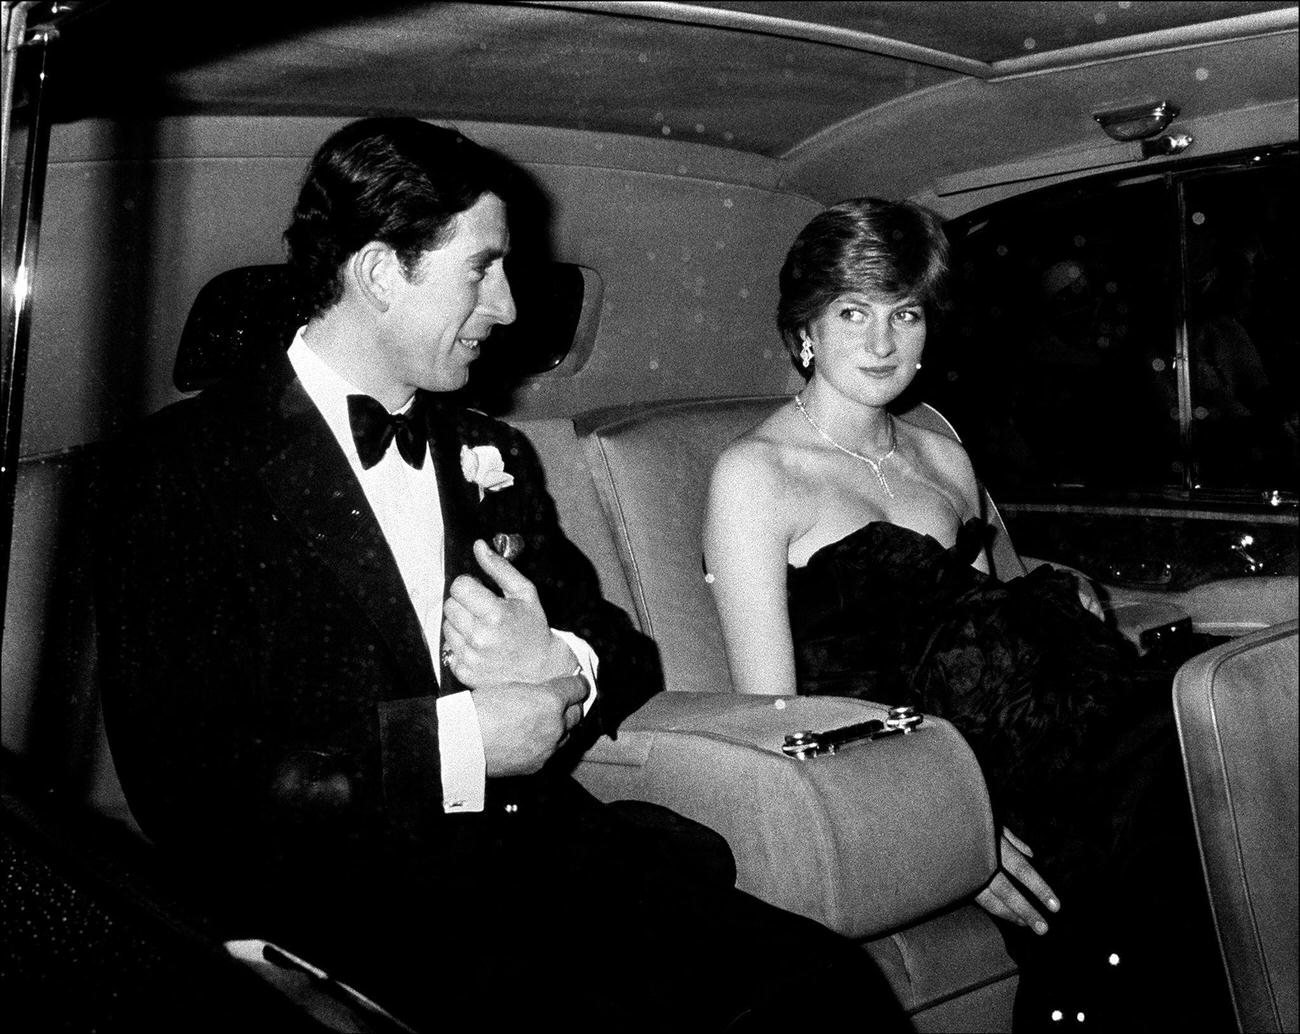 The Prince of Wales and his new fiancee Lady Diana Spencer arrive at Goldsmith Hall in London for a charity recital, March 1981.